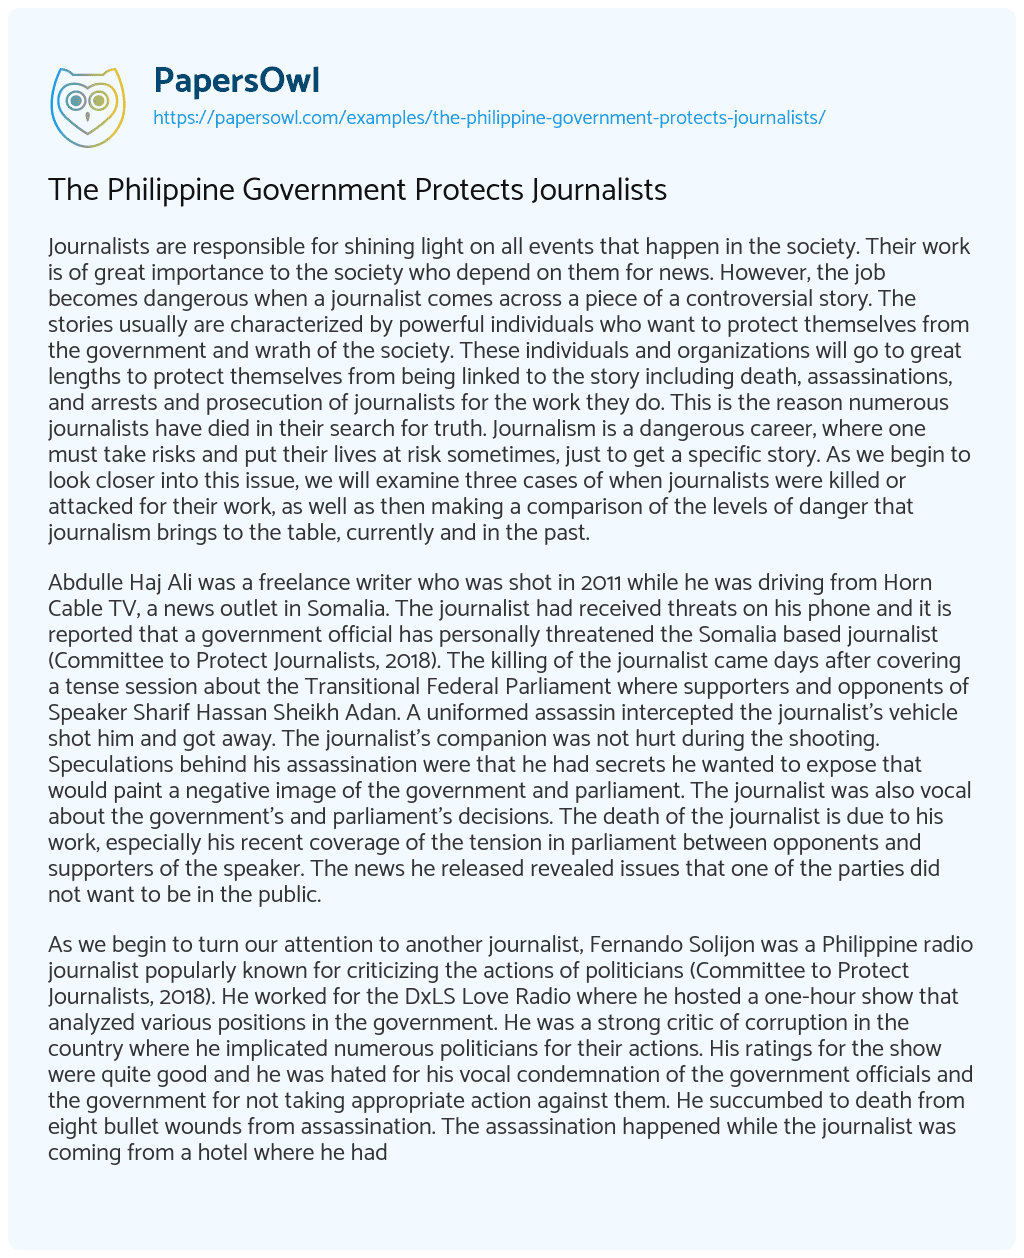 Essay on The Philippine Government Protects Journalists